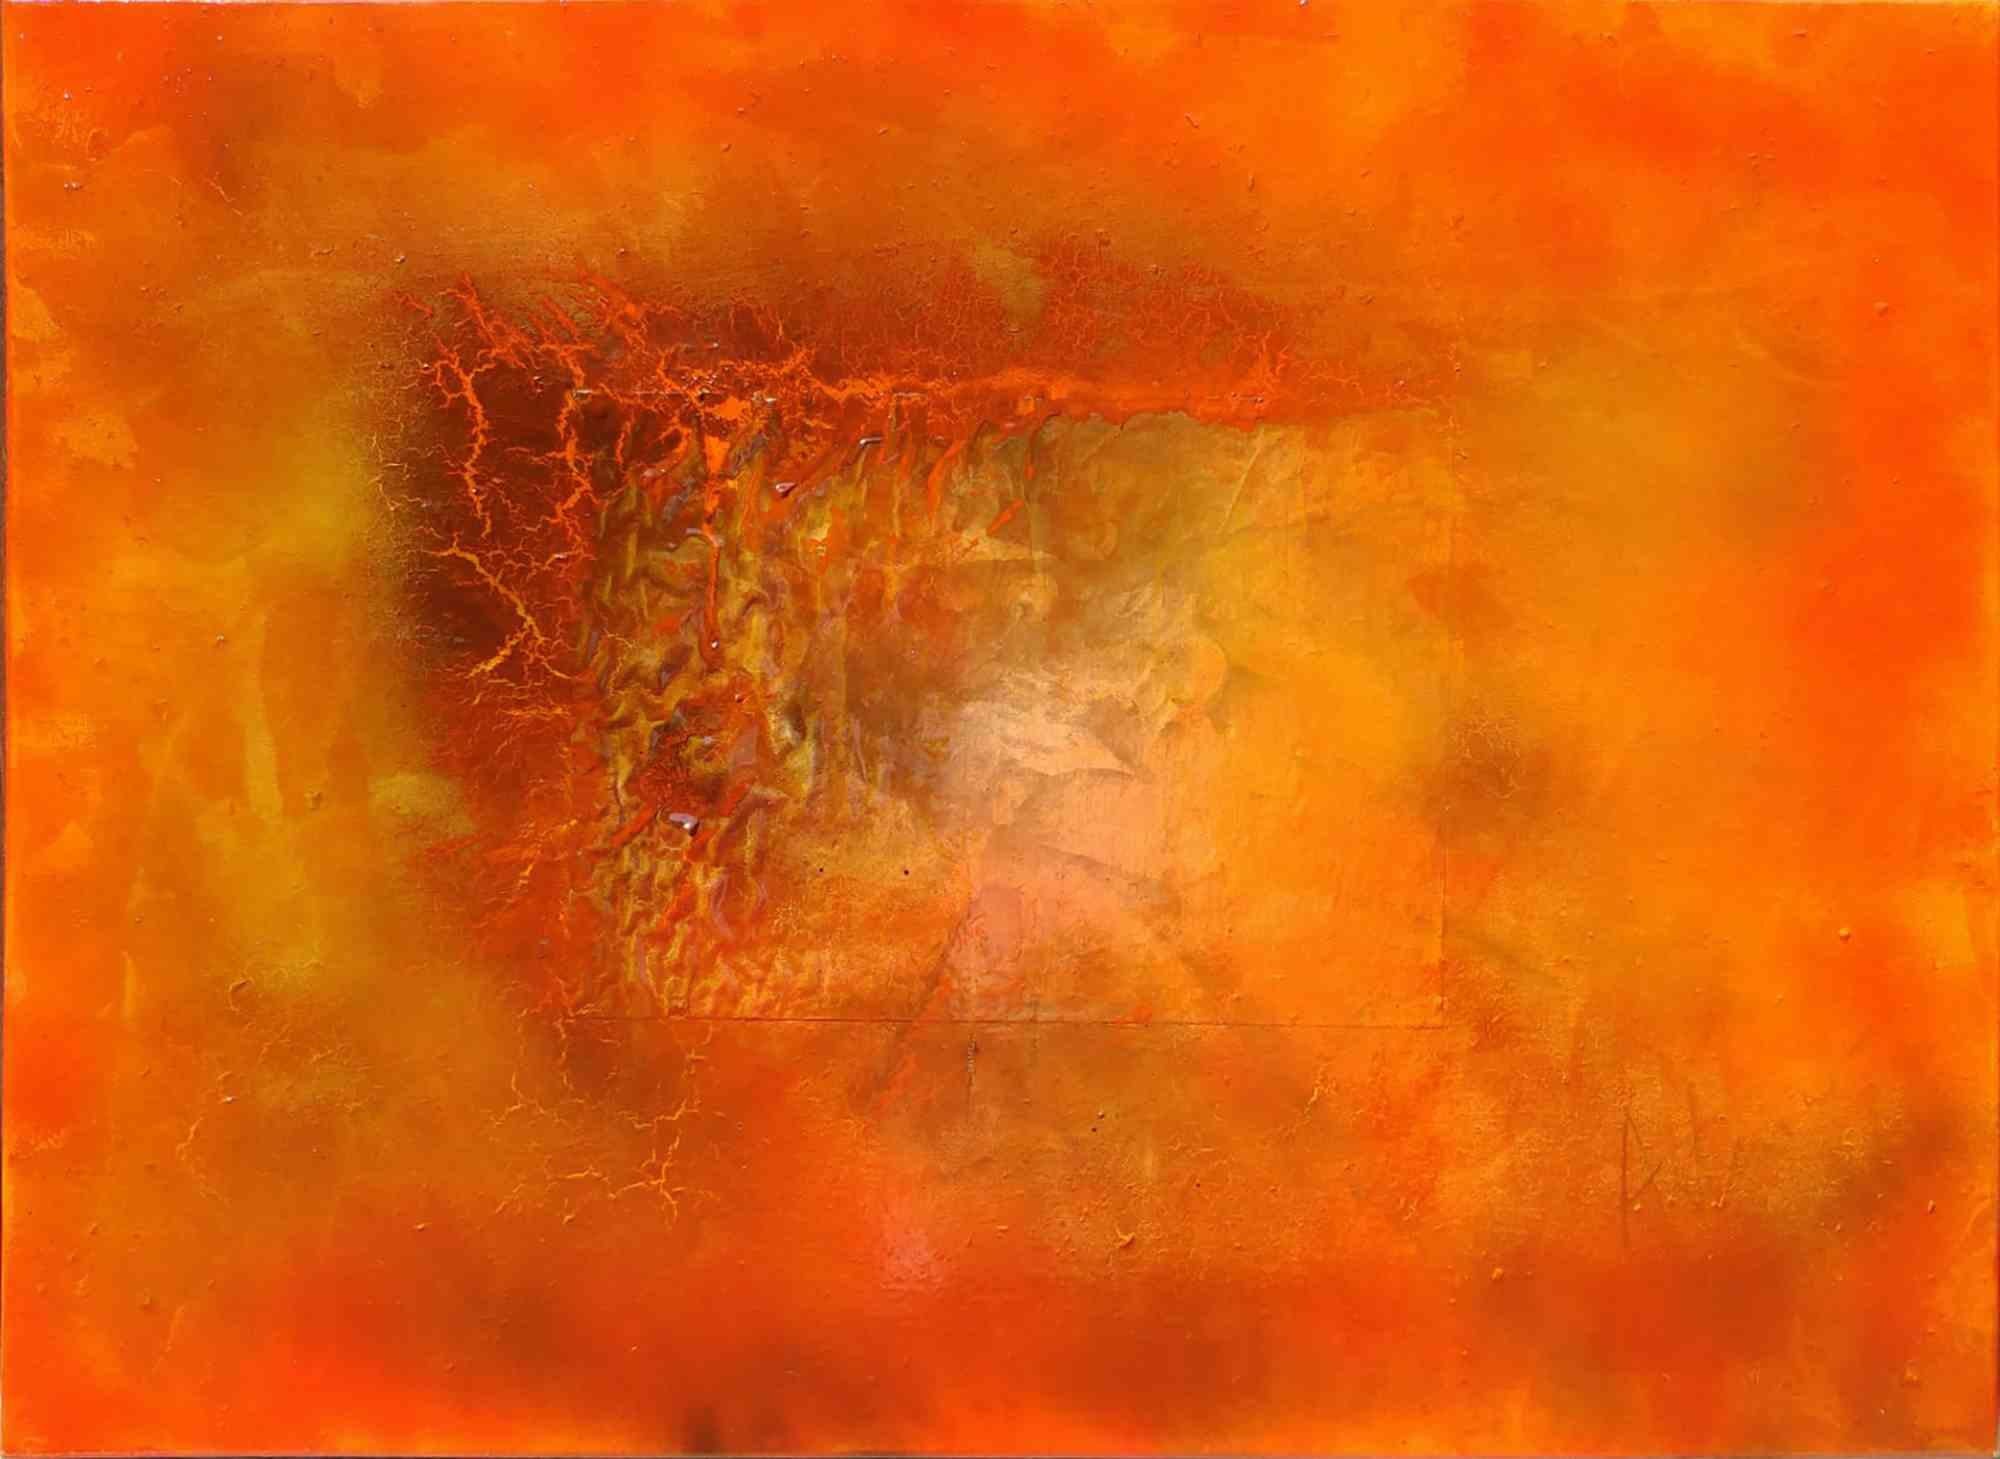 "Scorci d'infinito red border n.5"  - Mixed Media by Artemio Ceresa - 2023